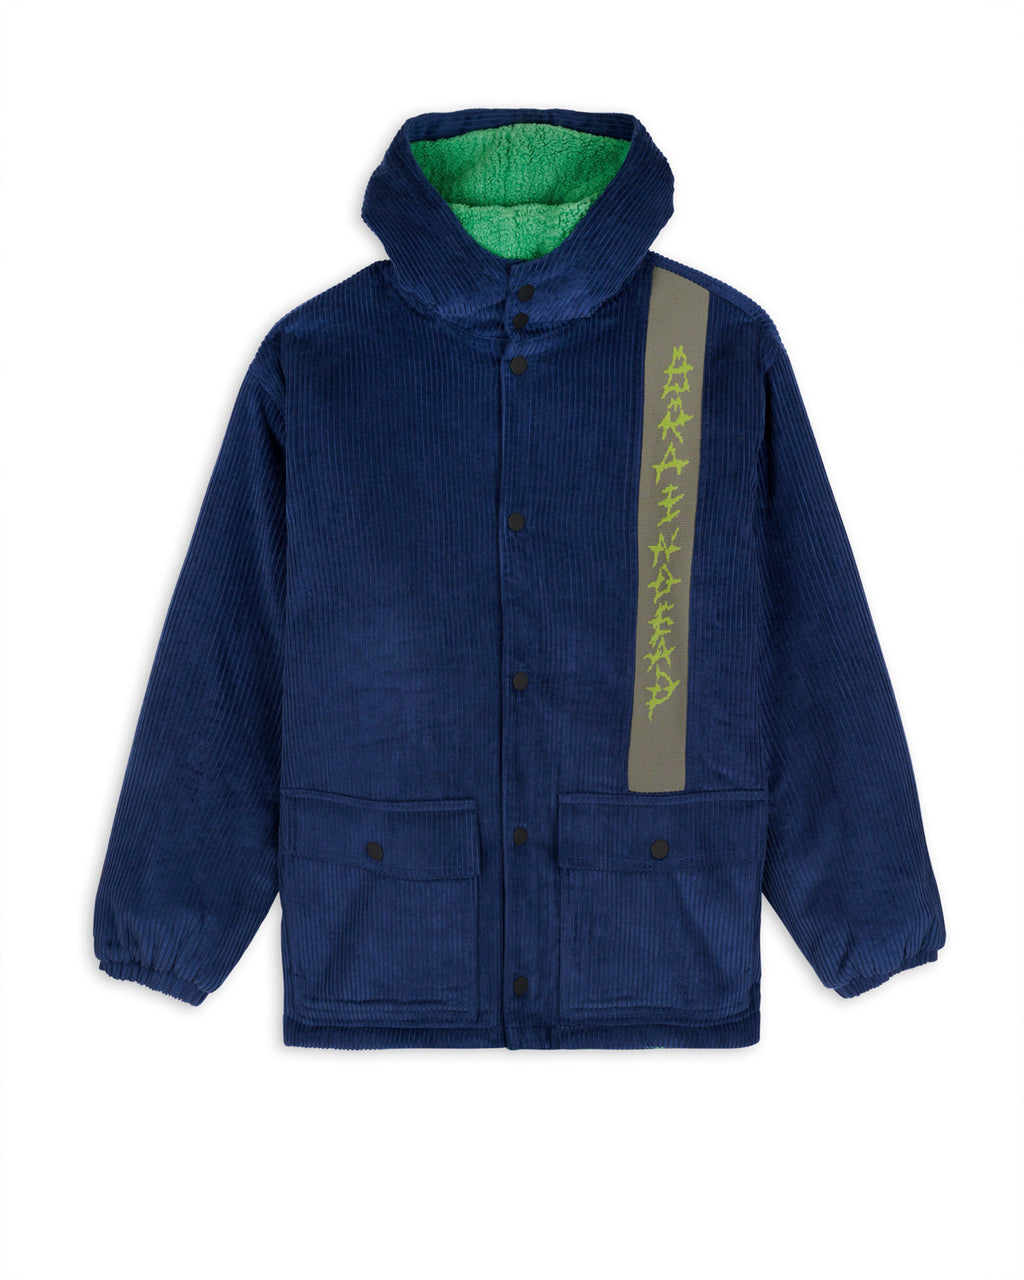 Forest Racing Jacket - Navy 1